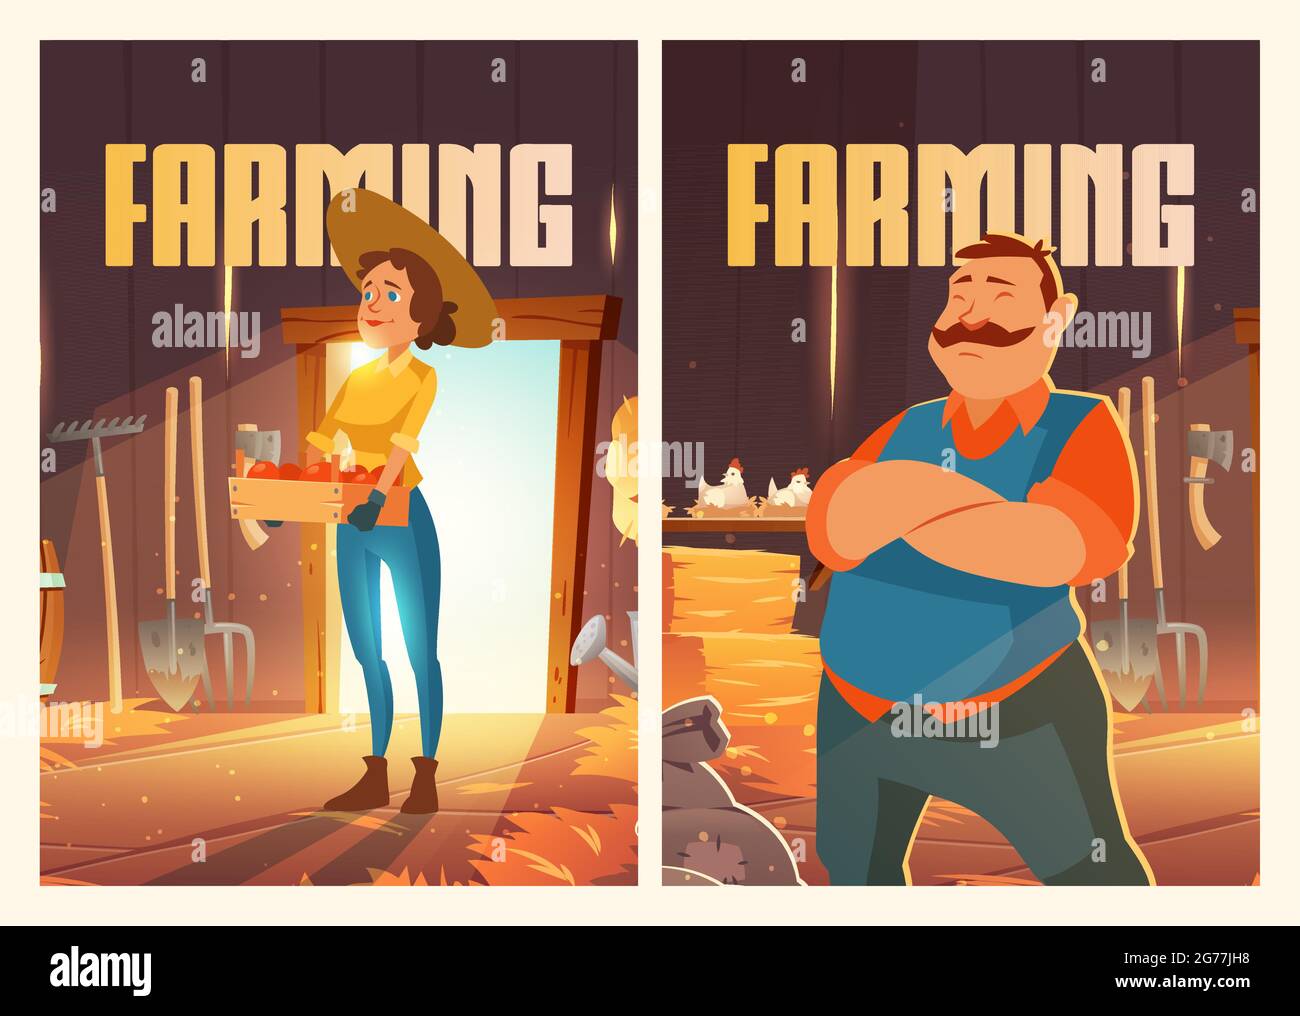 Farming posters with man and woman in barn with chickens, straw and garden tools. Vector flyers with cartoon illustration of farmers in countryside wooden shed with hens, harvest and hay stacks Stock Vector